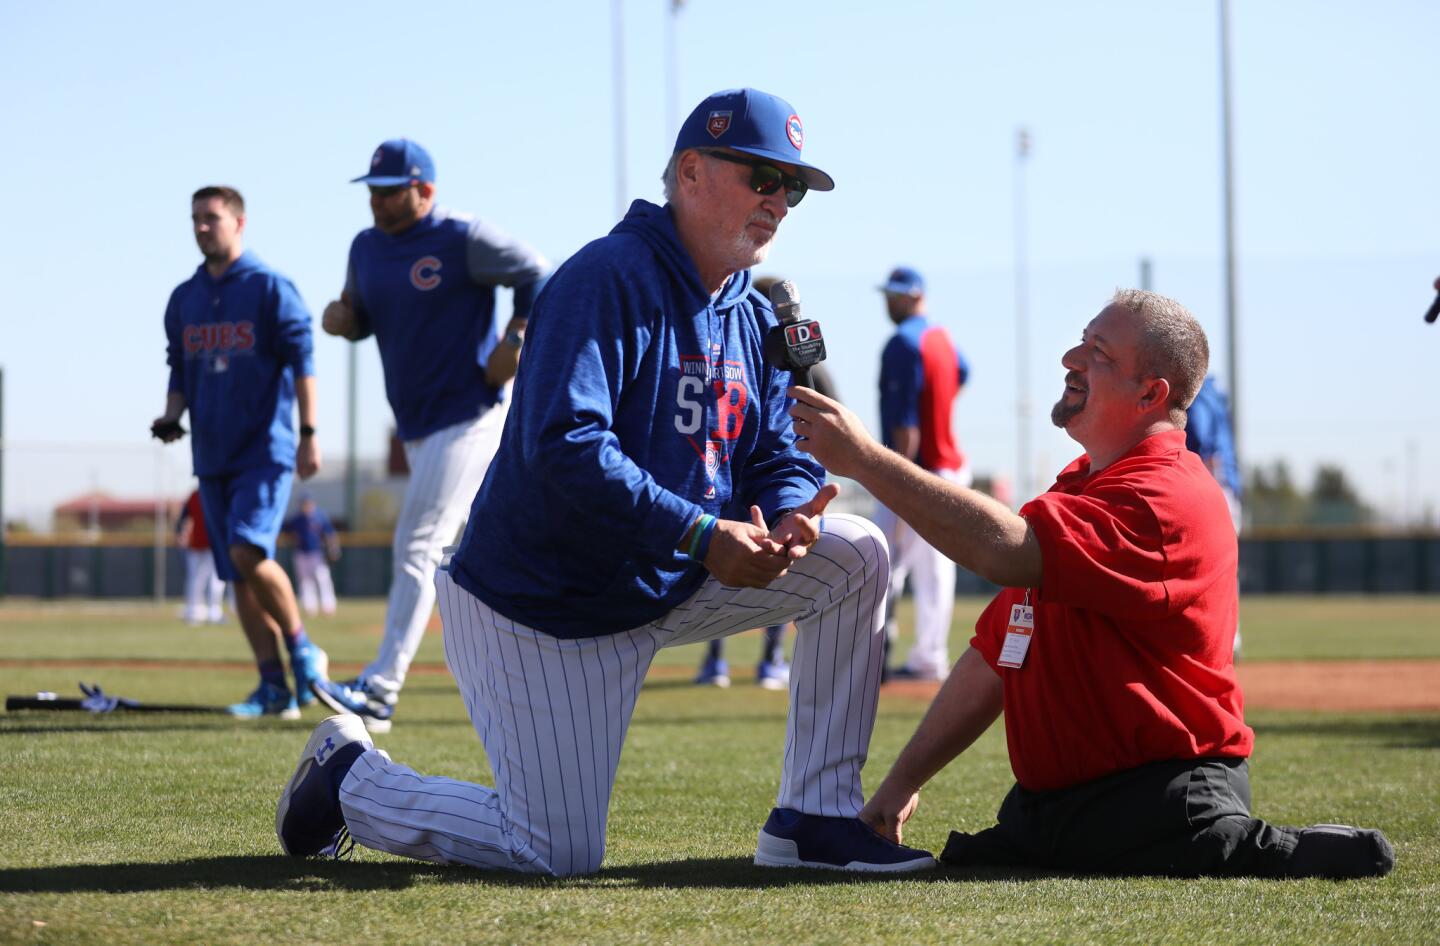 Joe Maddon is interviewed by Dave Stevens of the Disability Network on the practice field in Mesa Arizona on Tuesday Feb. 27, 2018.